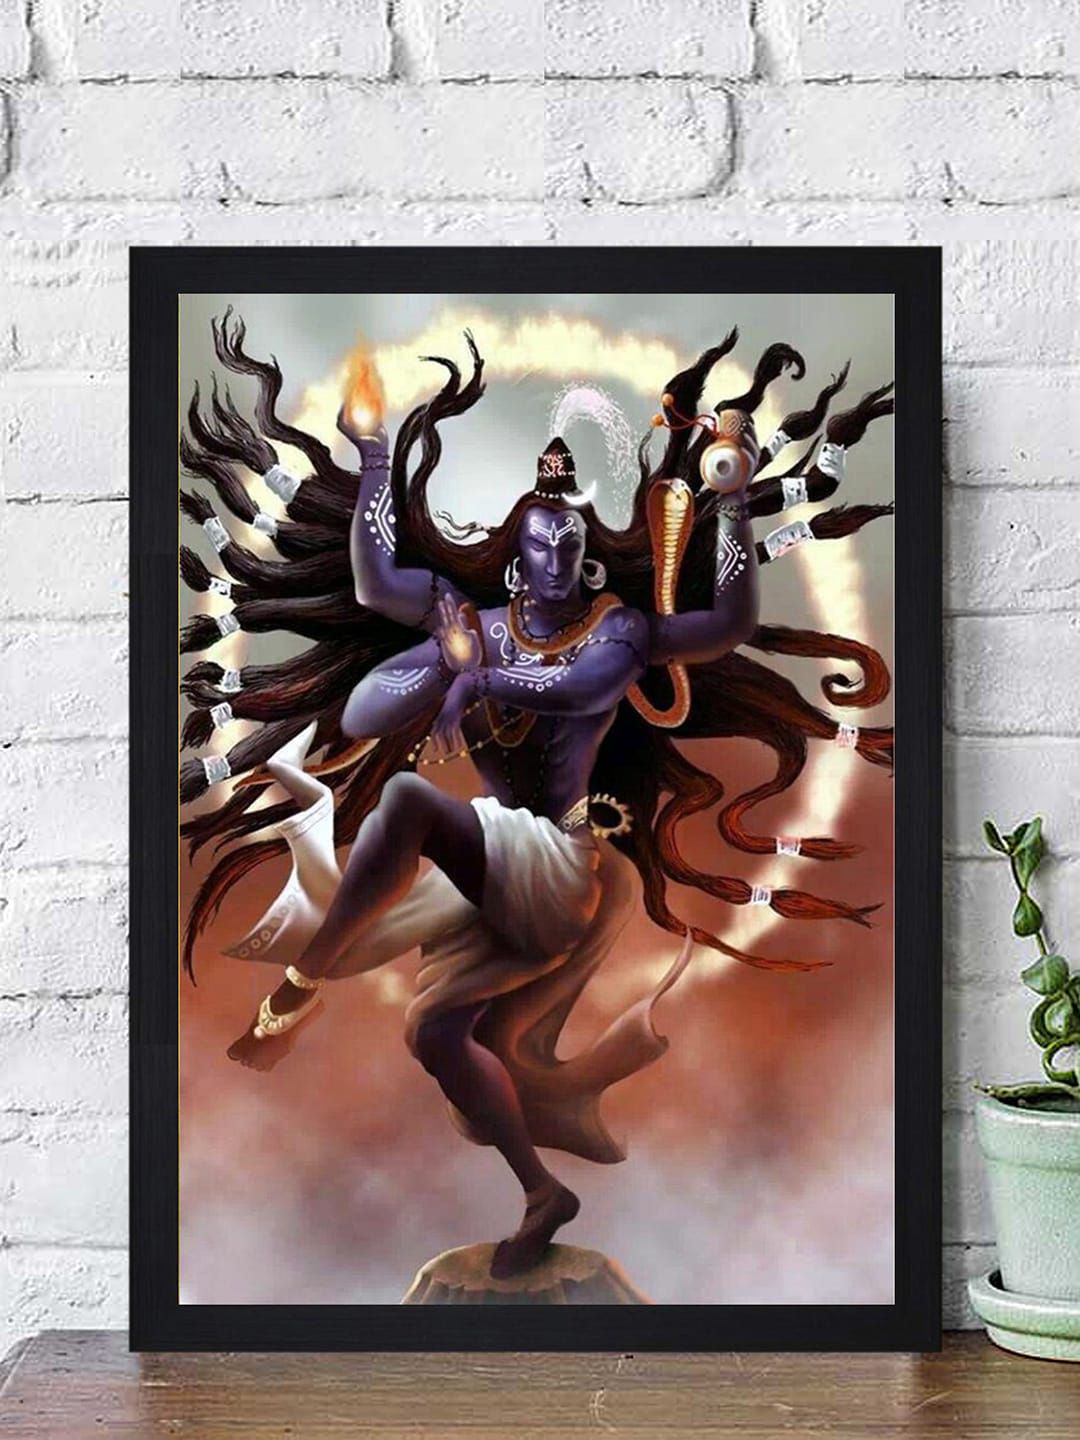 Gallery99 Multi Lord Shiva Roop Texture Paper Framed Wall Art Price in India